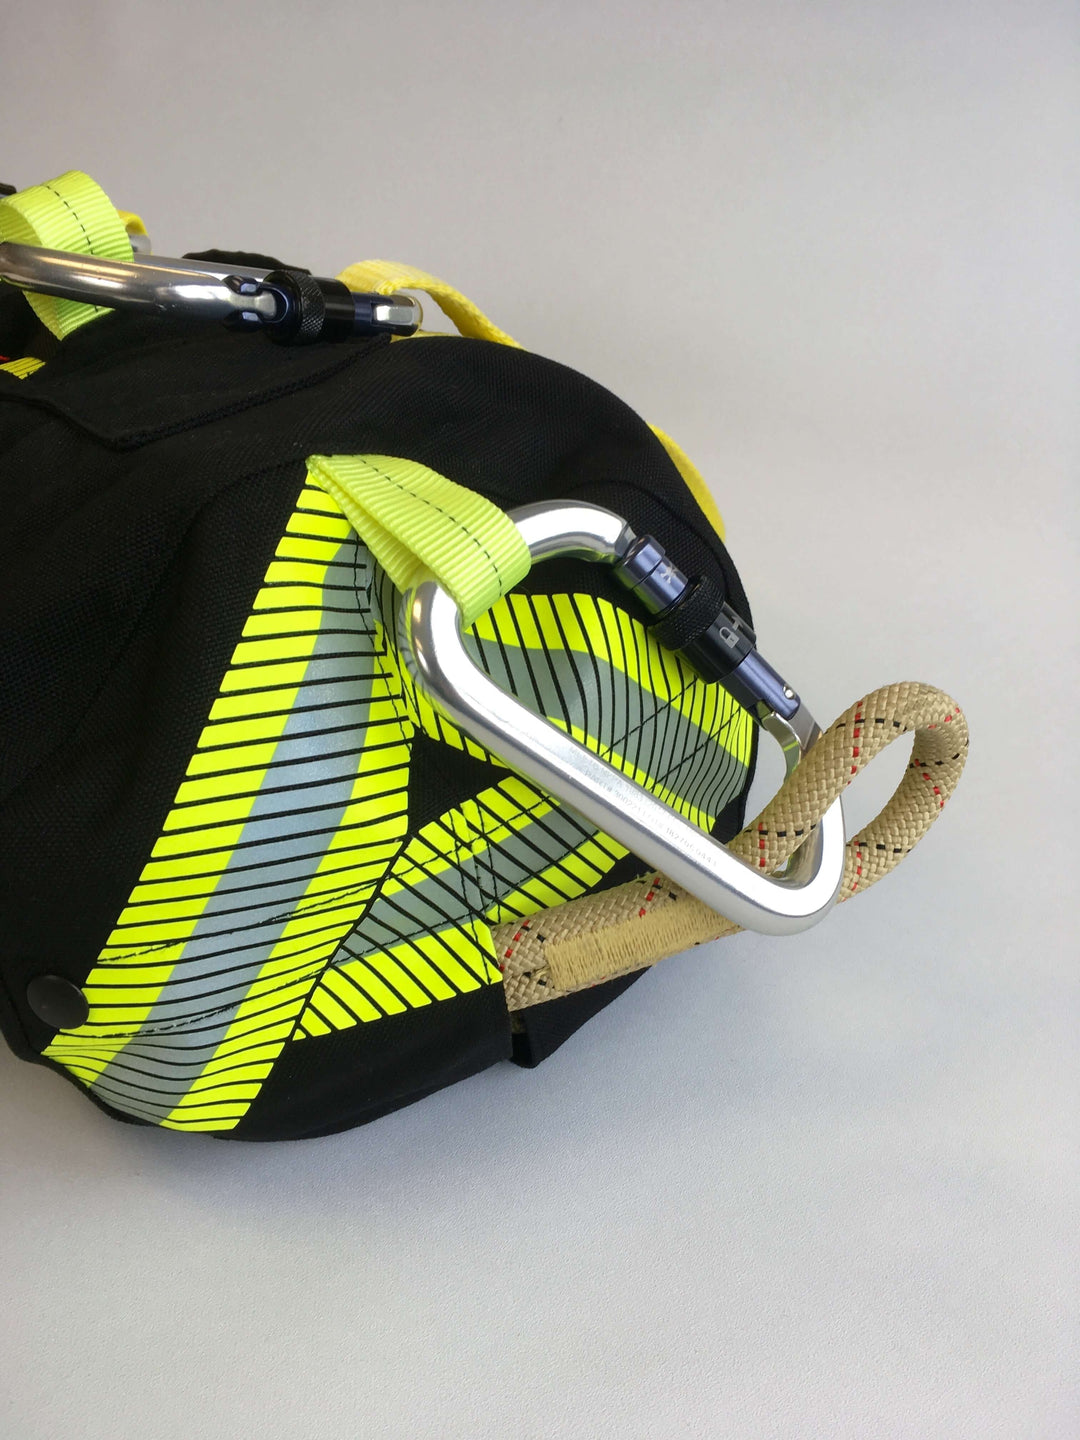 Fireground Special Operations Roof Ops Kit carabiner